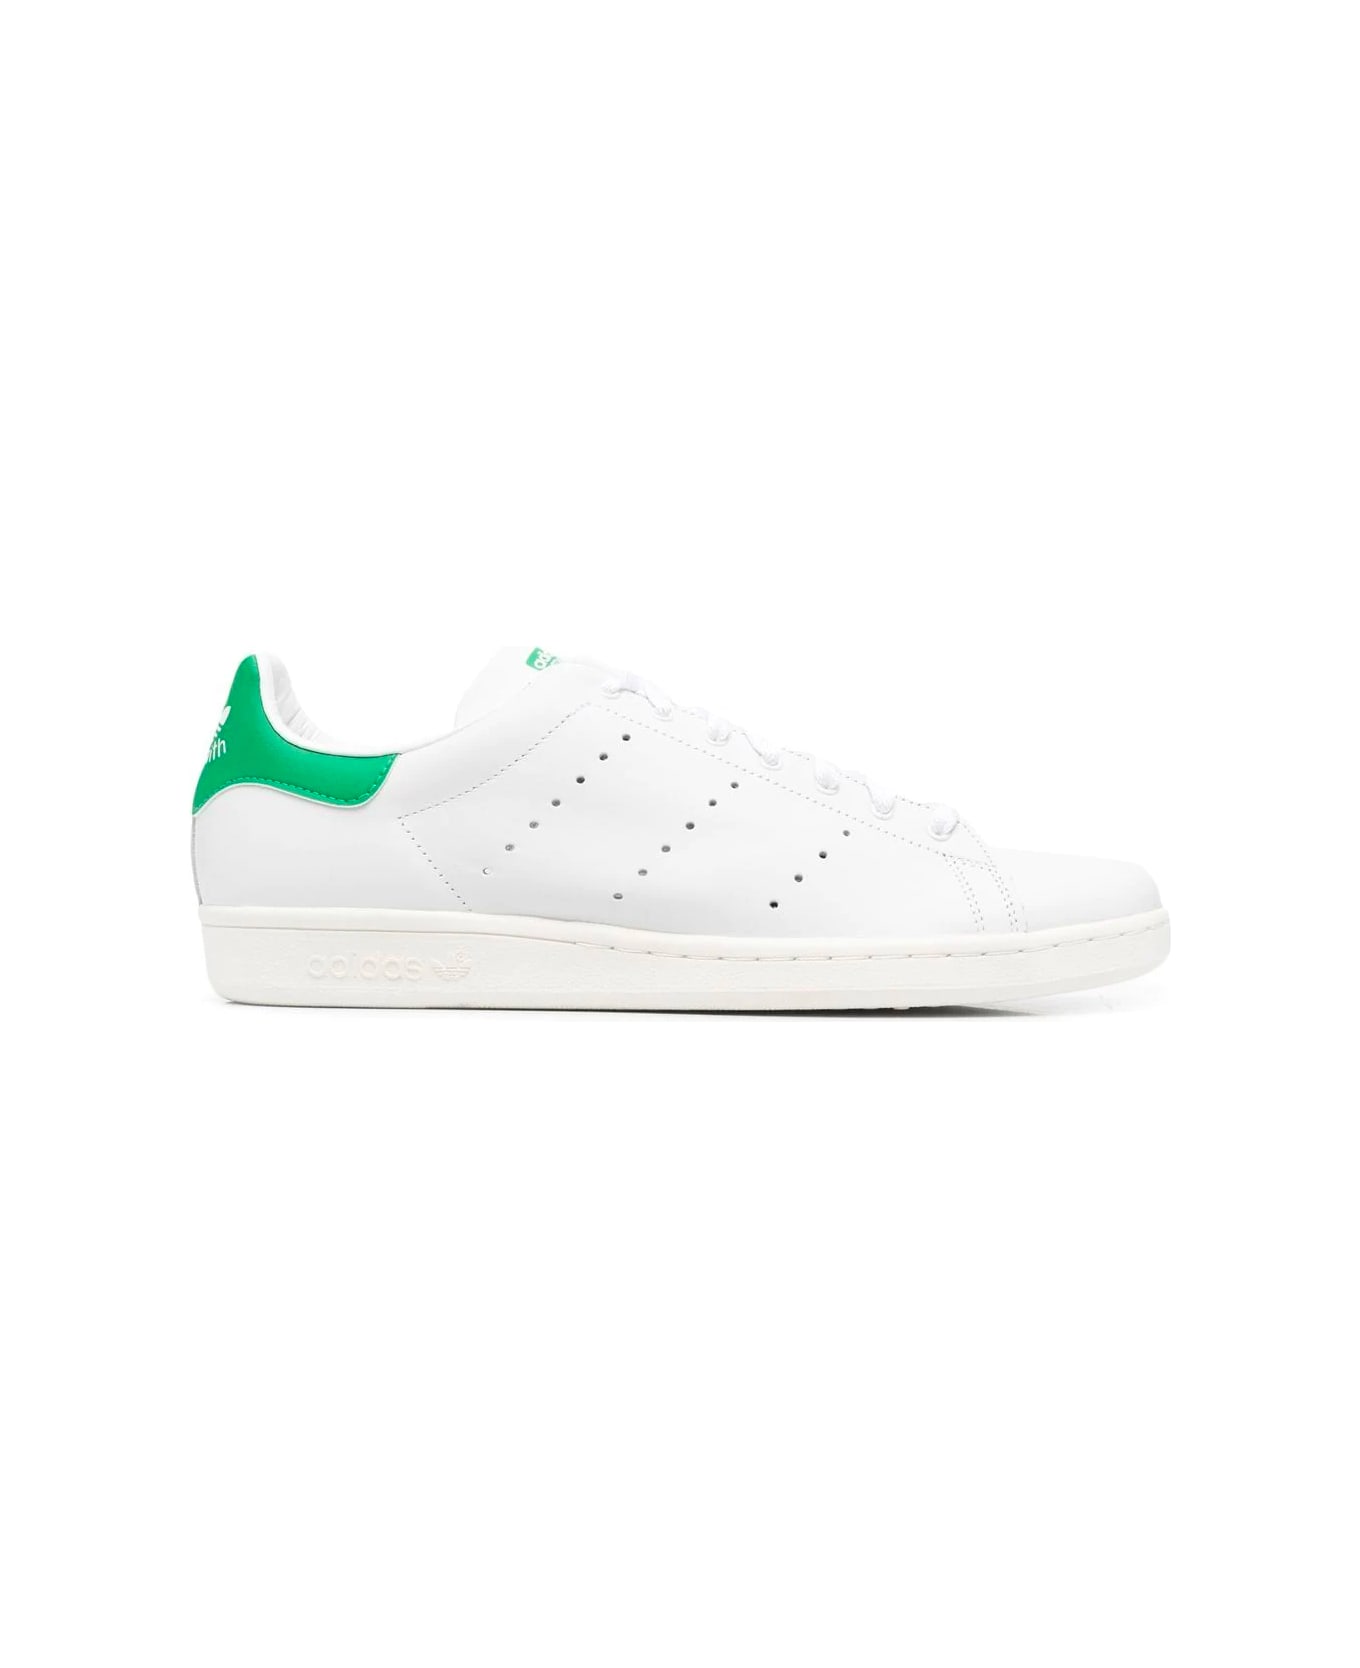 Adidas Stan Smith 80s Sneakers - Ftwwht Ftwwht Green スニーカー